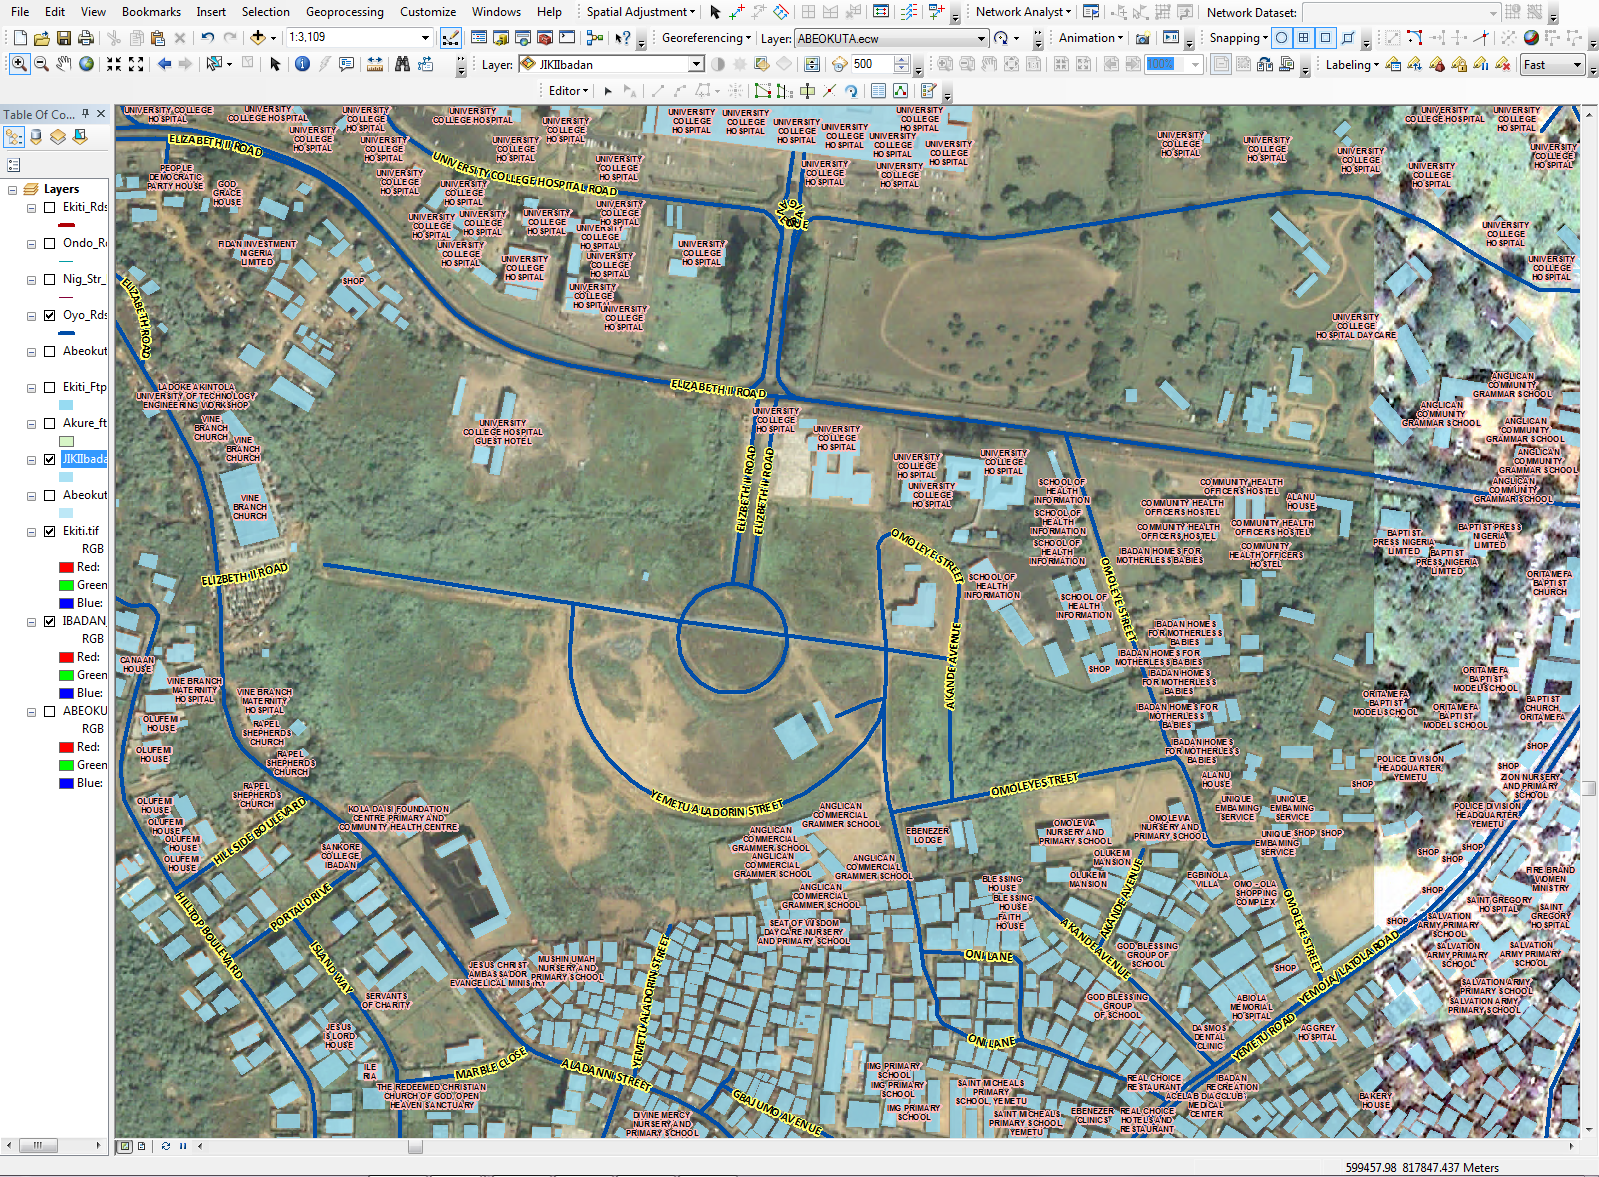 road-network-and-building-footprints-in-Ibadan-(Portion of)-overlaid-on-high-resolution-satellite-imagery